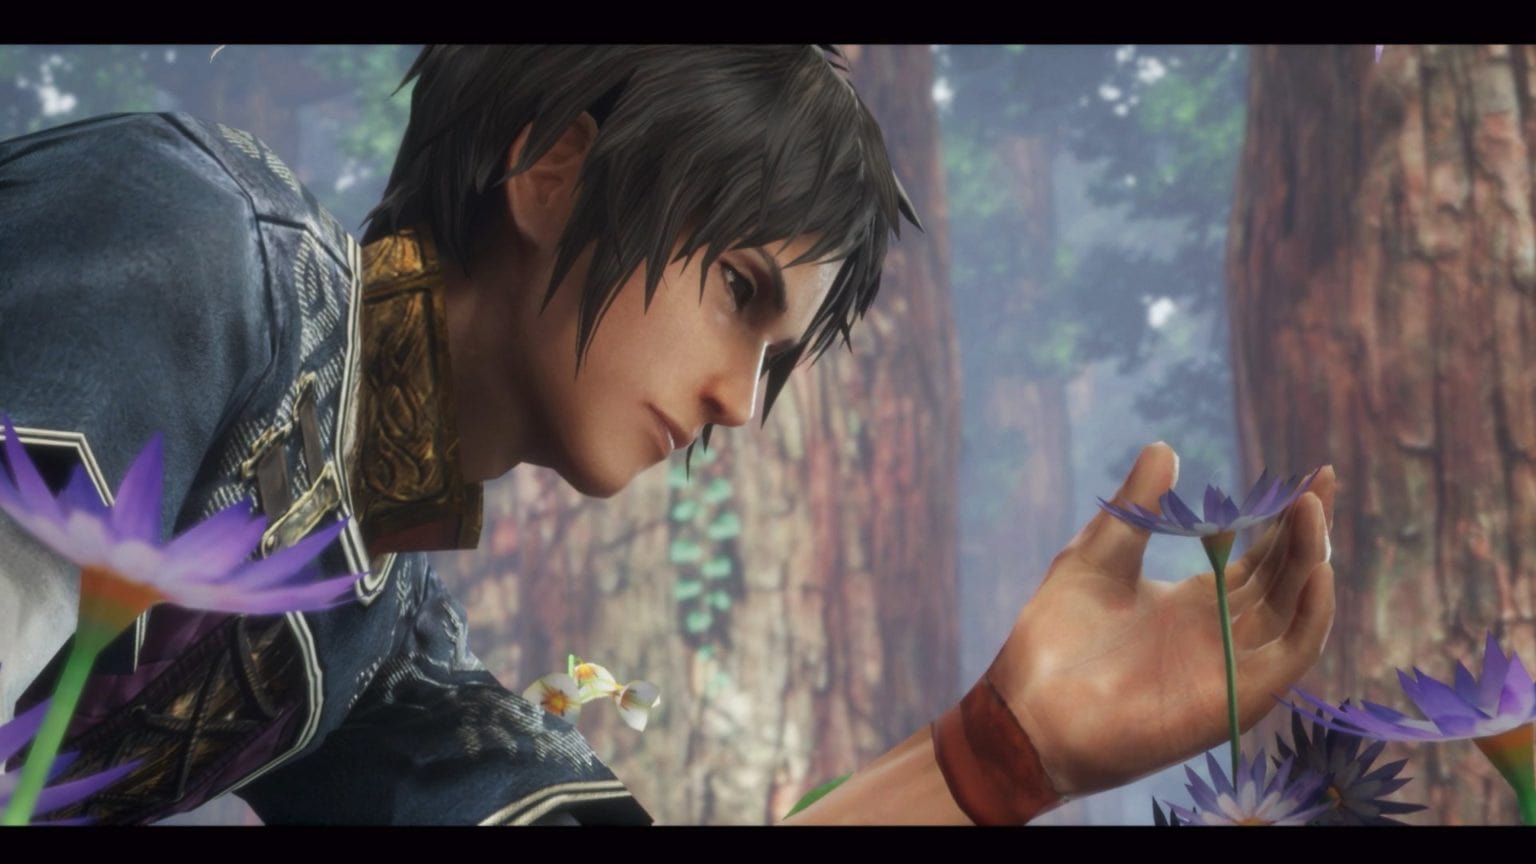 The Last Remnant Remastered gets a surprise release in the App Store